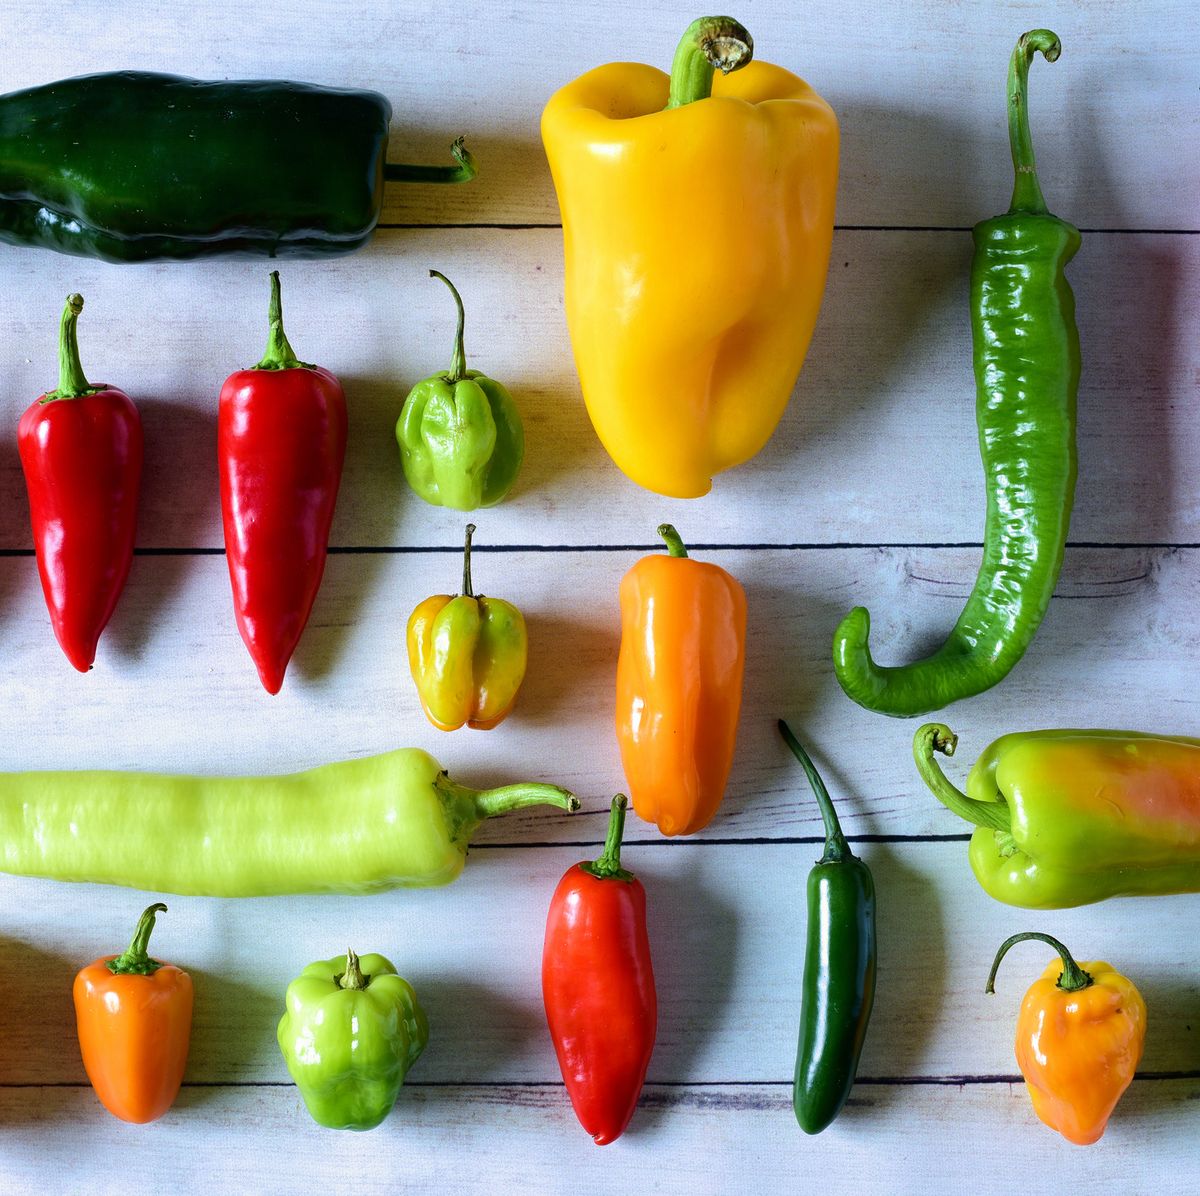 Types of chili peppers: the 10 best varieties to grow